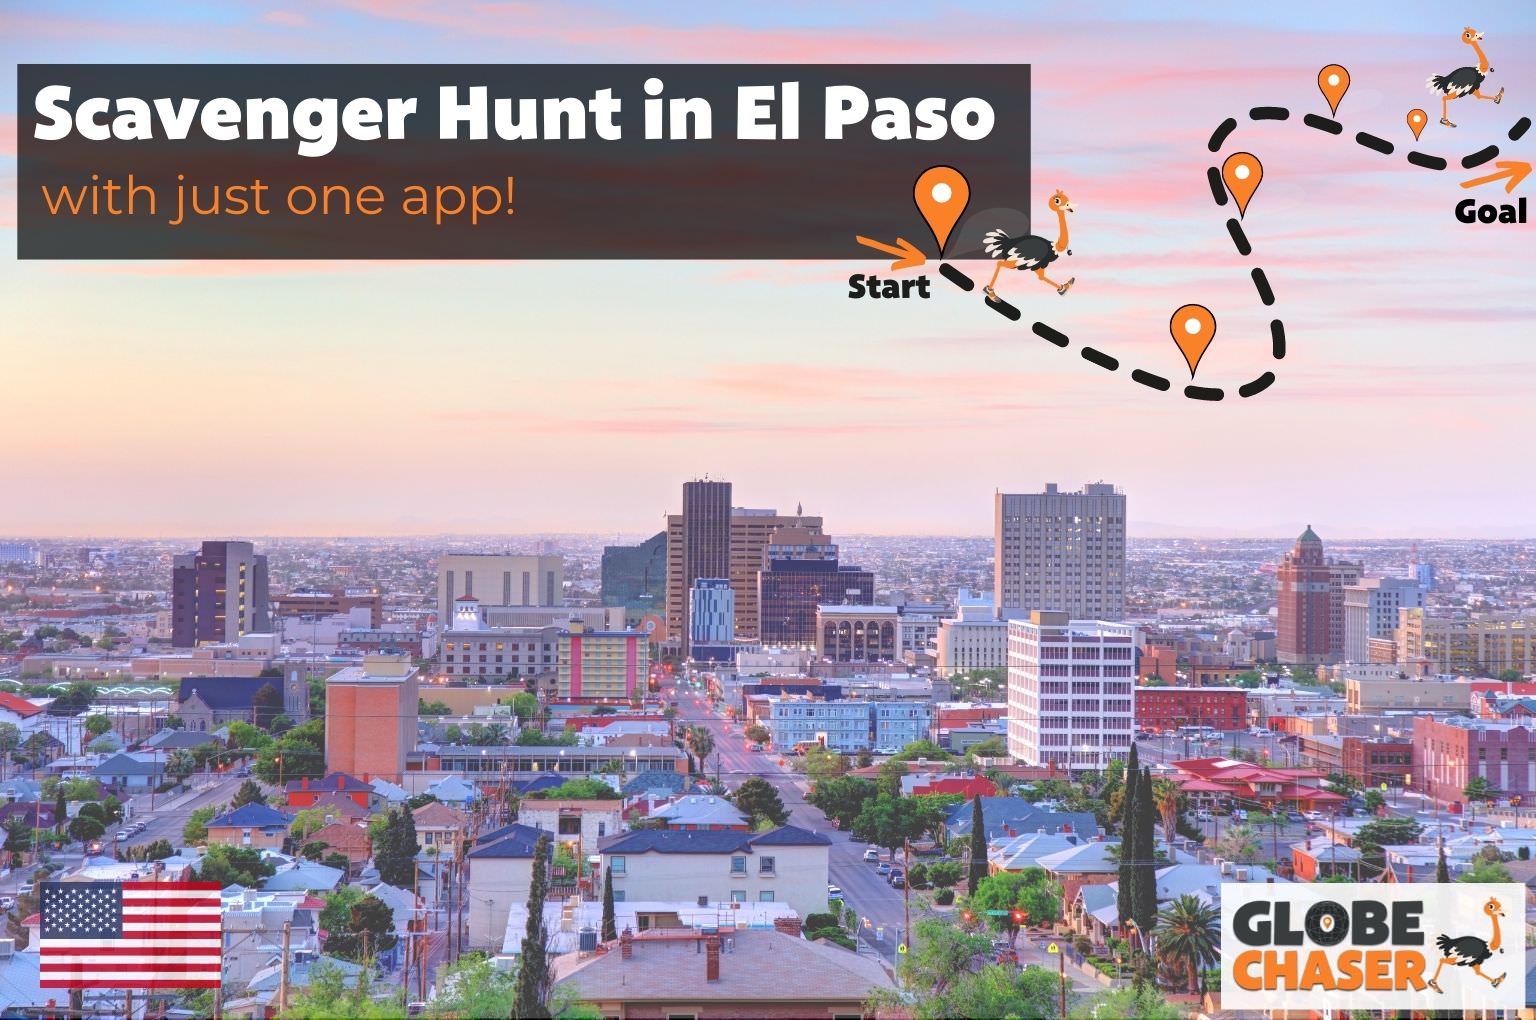 Scavenger Hunt in El Paso, USA - Family Activities with the Globe Chaser App for Outdoor Fun